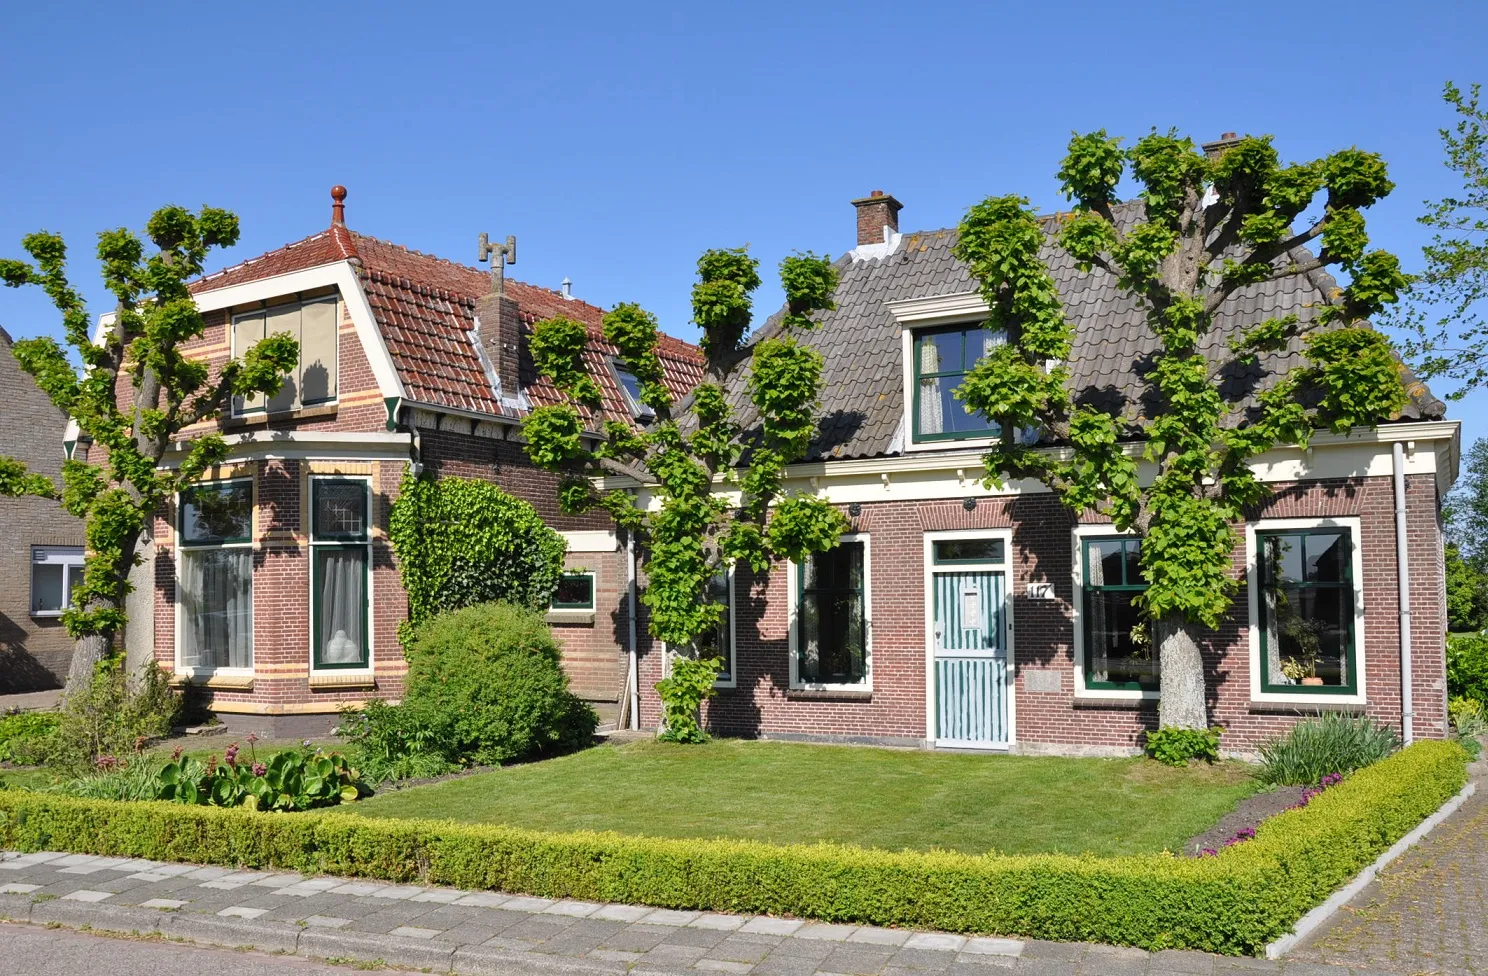 Photo showing: Two houses in Rijpwetering on the (Municipality Kaag en Braassem, Province South Holland, Netherlands).